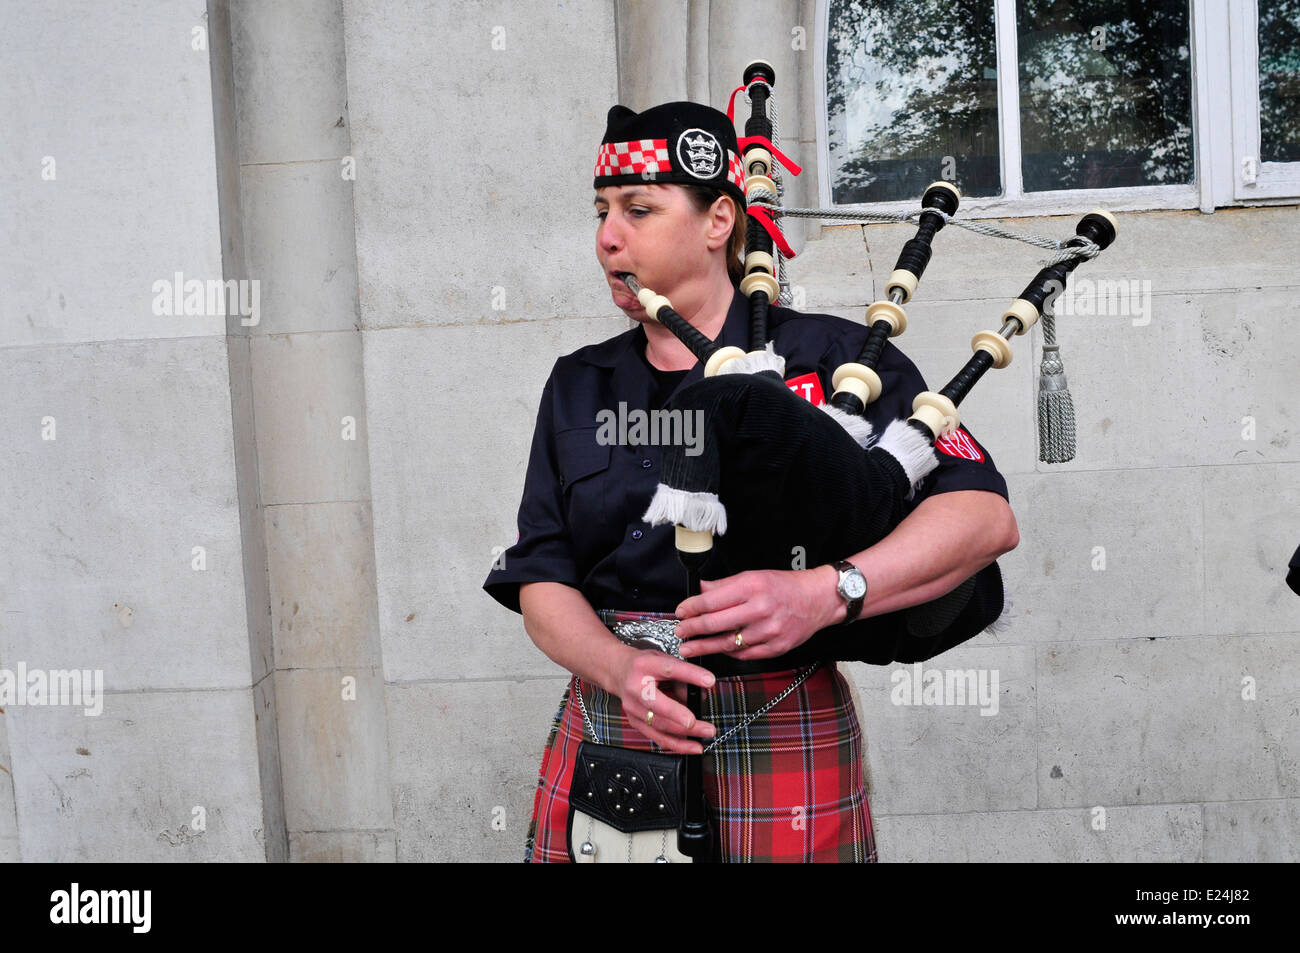 A female Scottish piper plays bagpipes in London Stock Photo